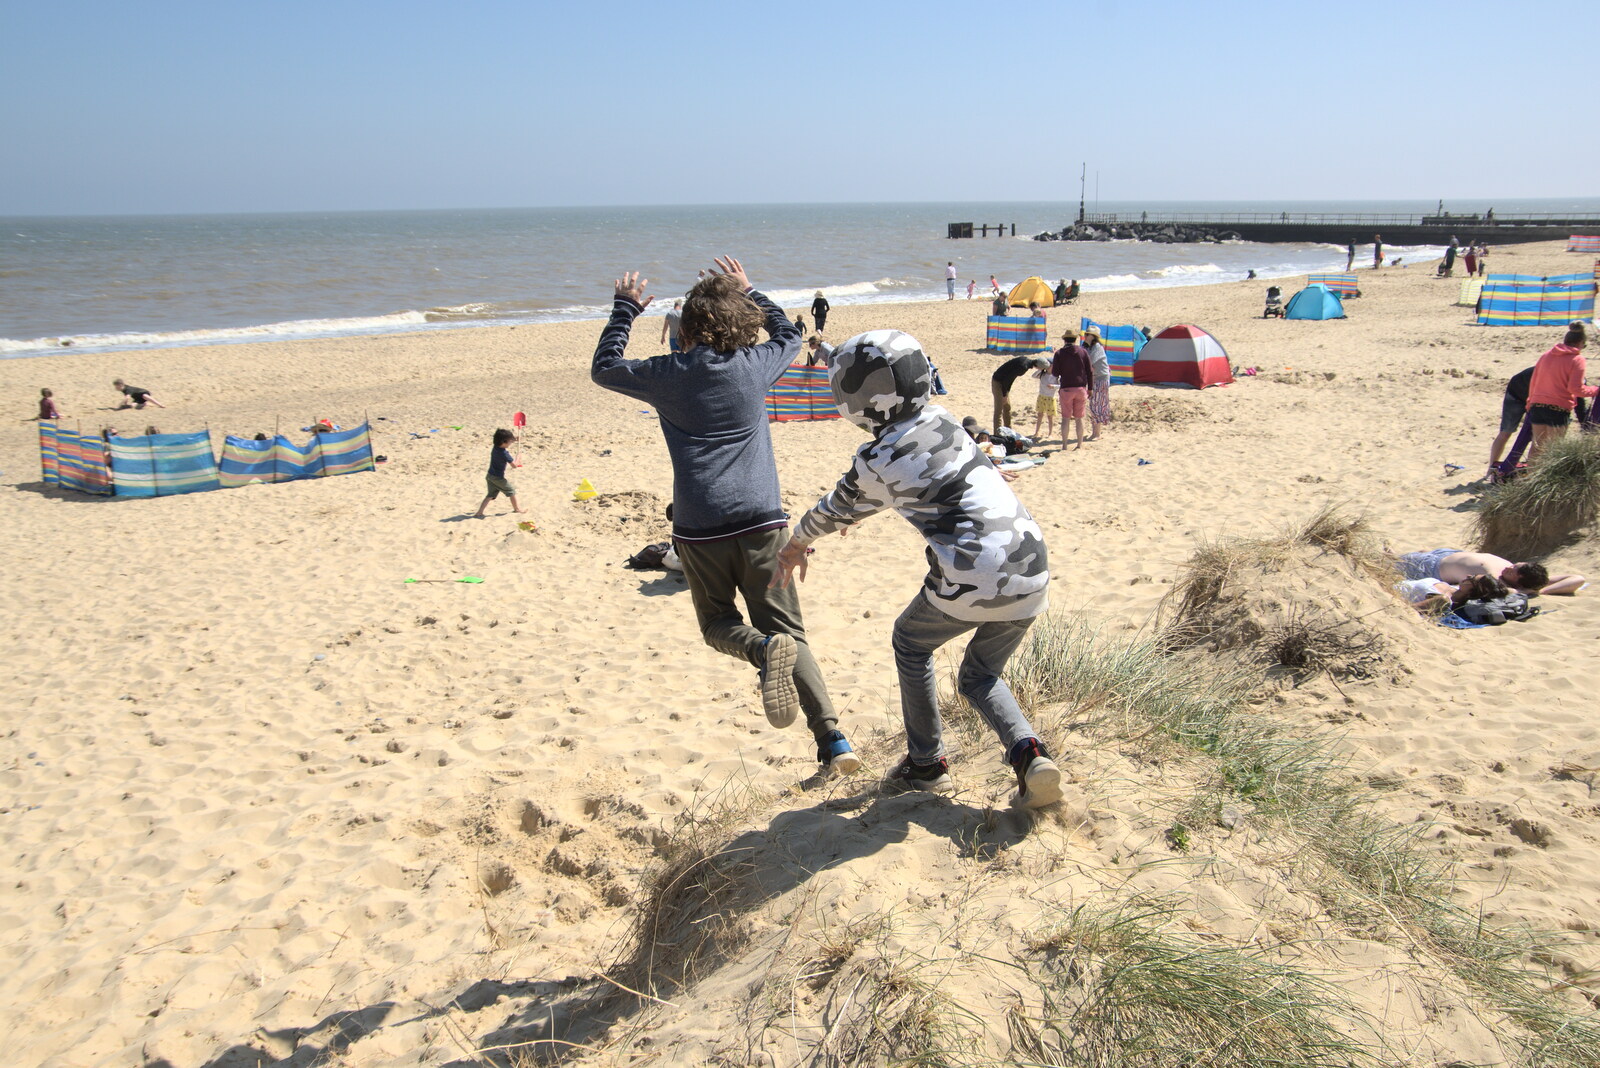 The boys jump off the dunes from A Day at the Beach with Sis, Southwold, Suffolk - 31st May 2021